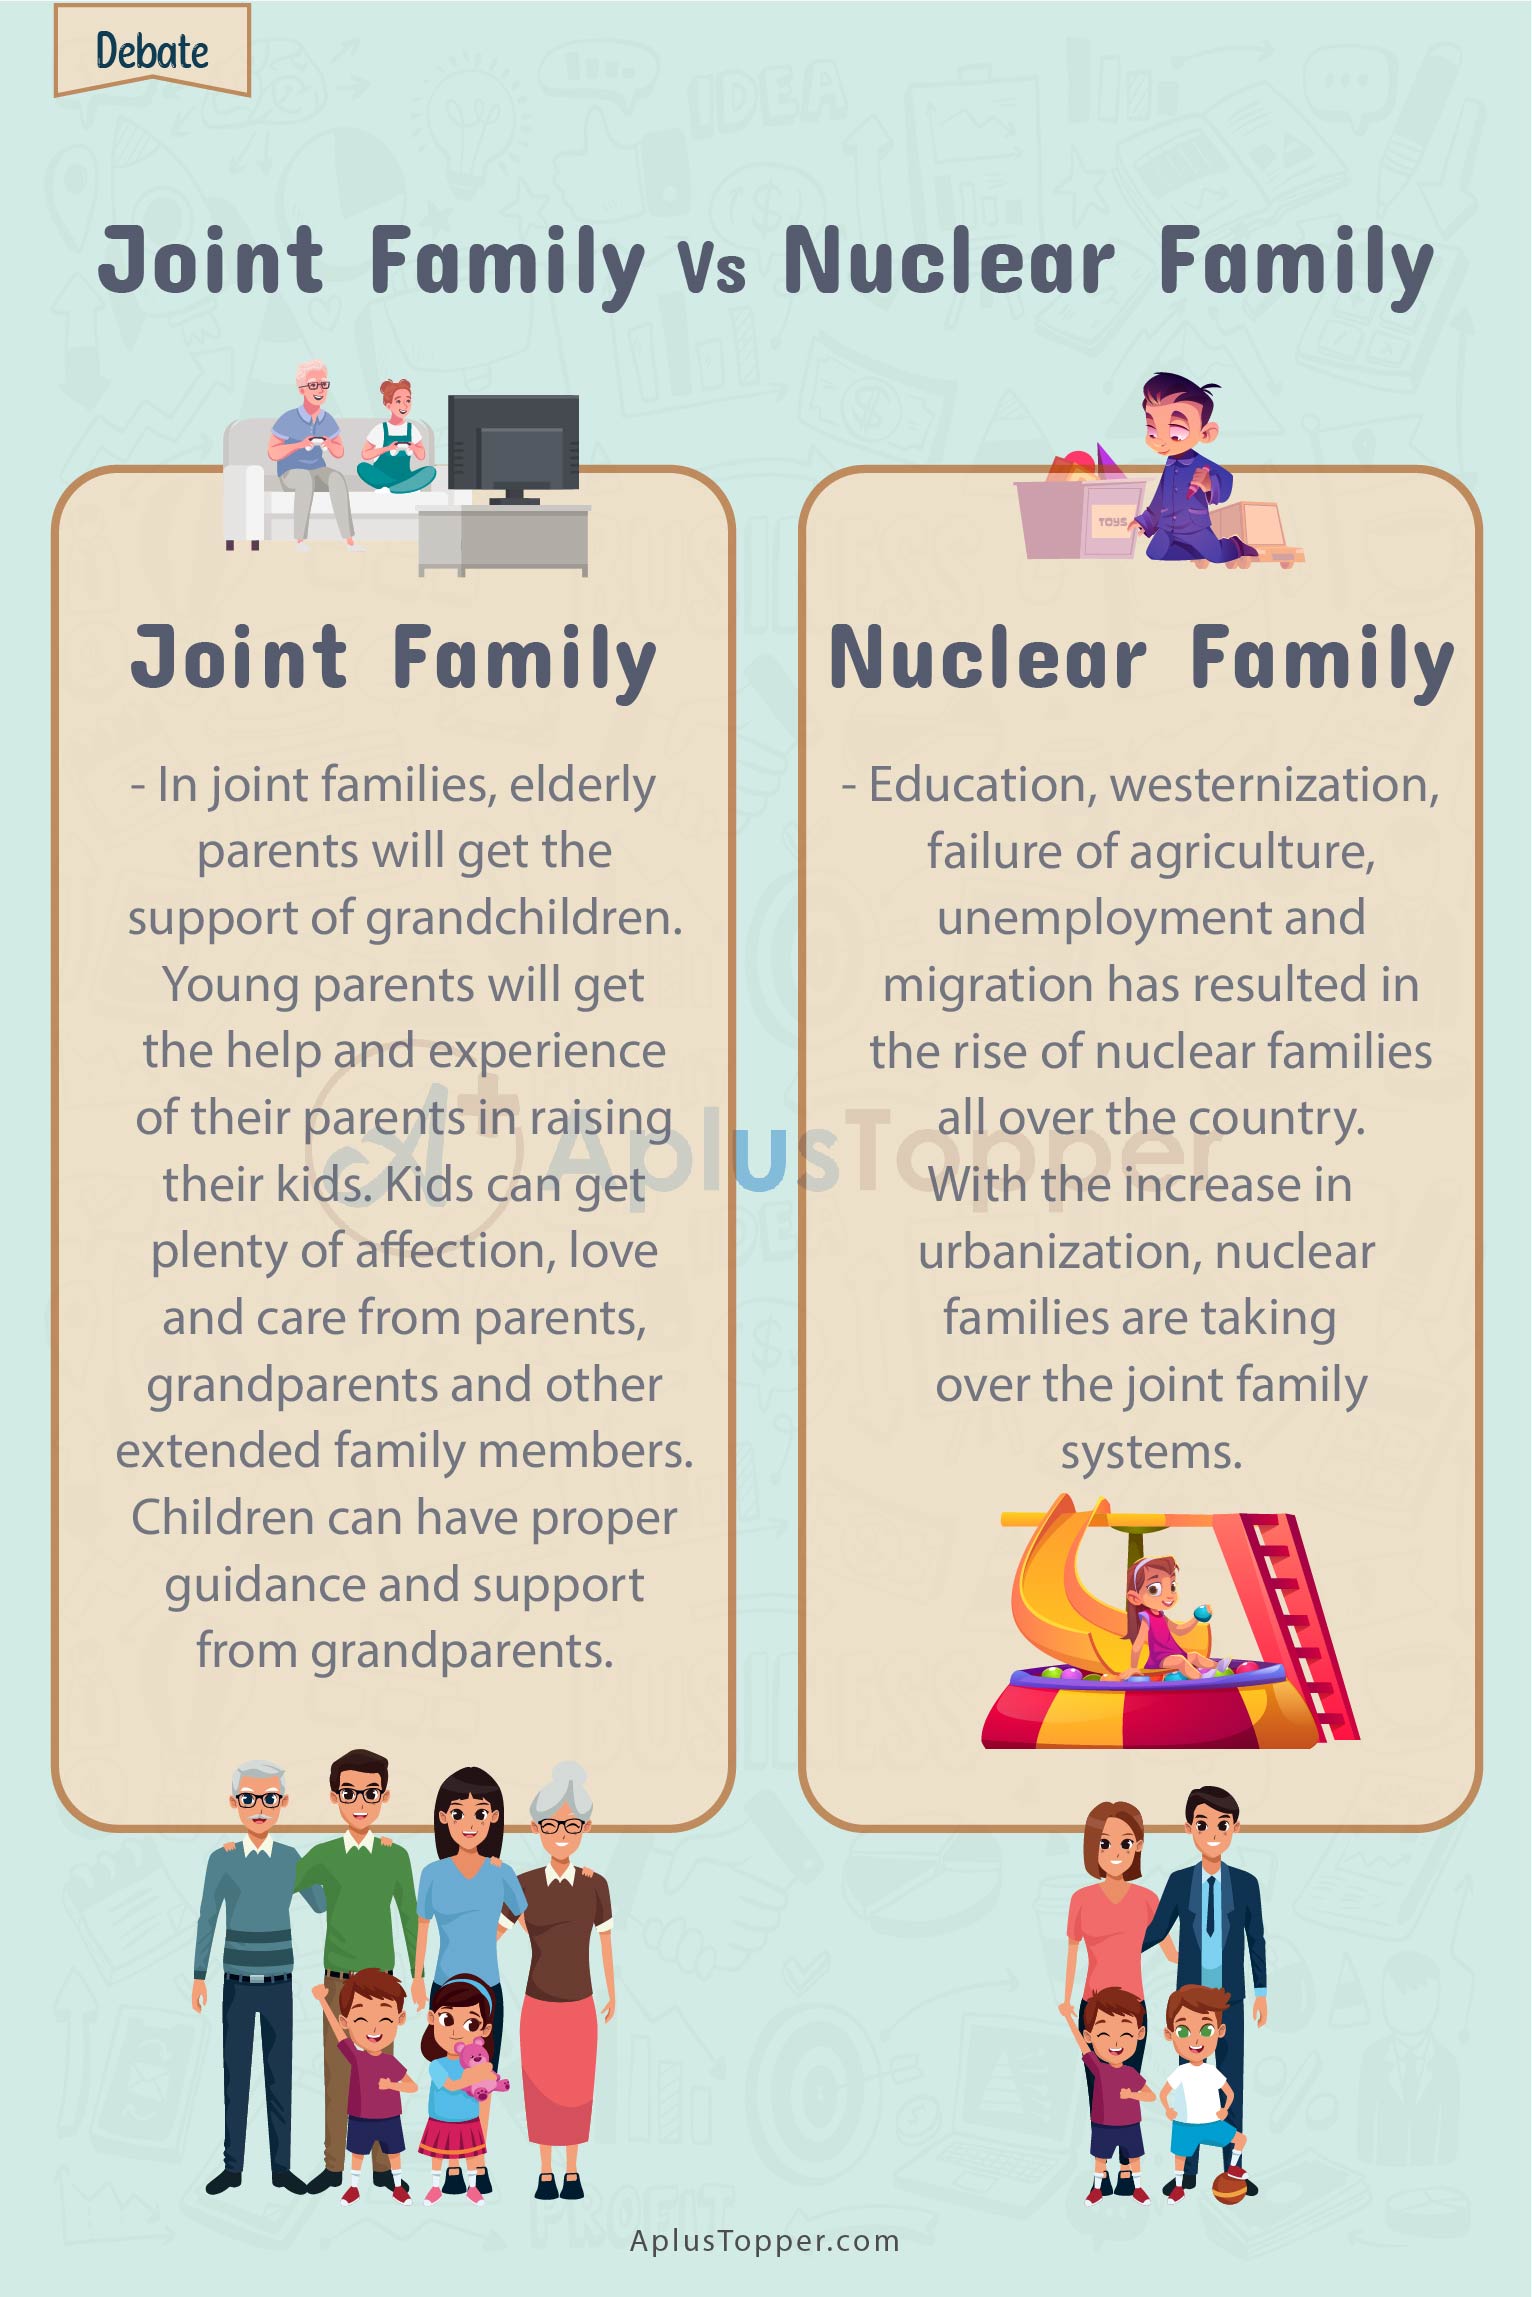 Debate on Joint Family Vs Nuclear Family 2